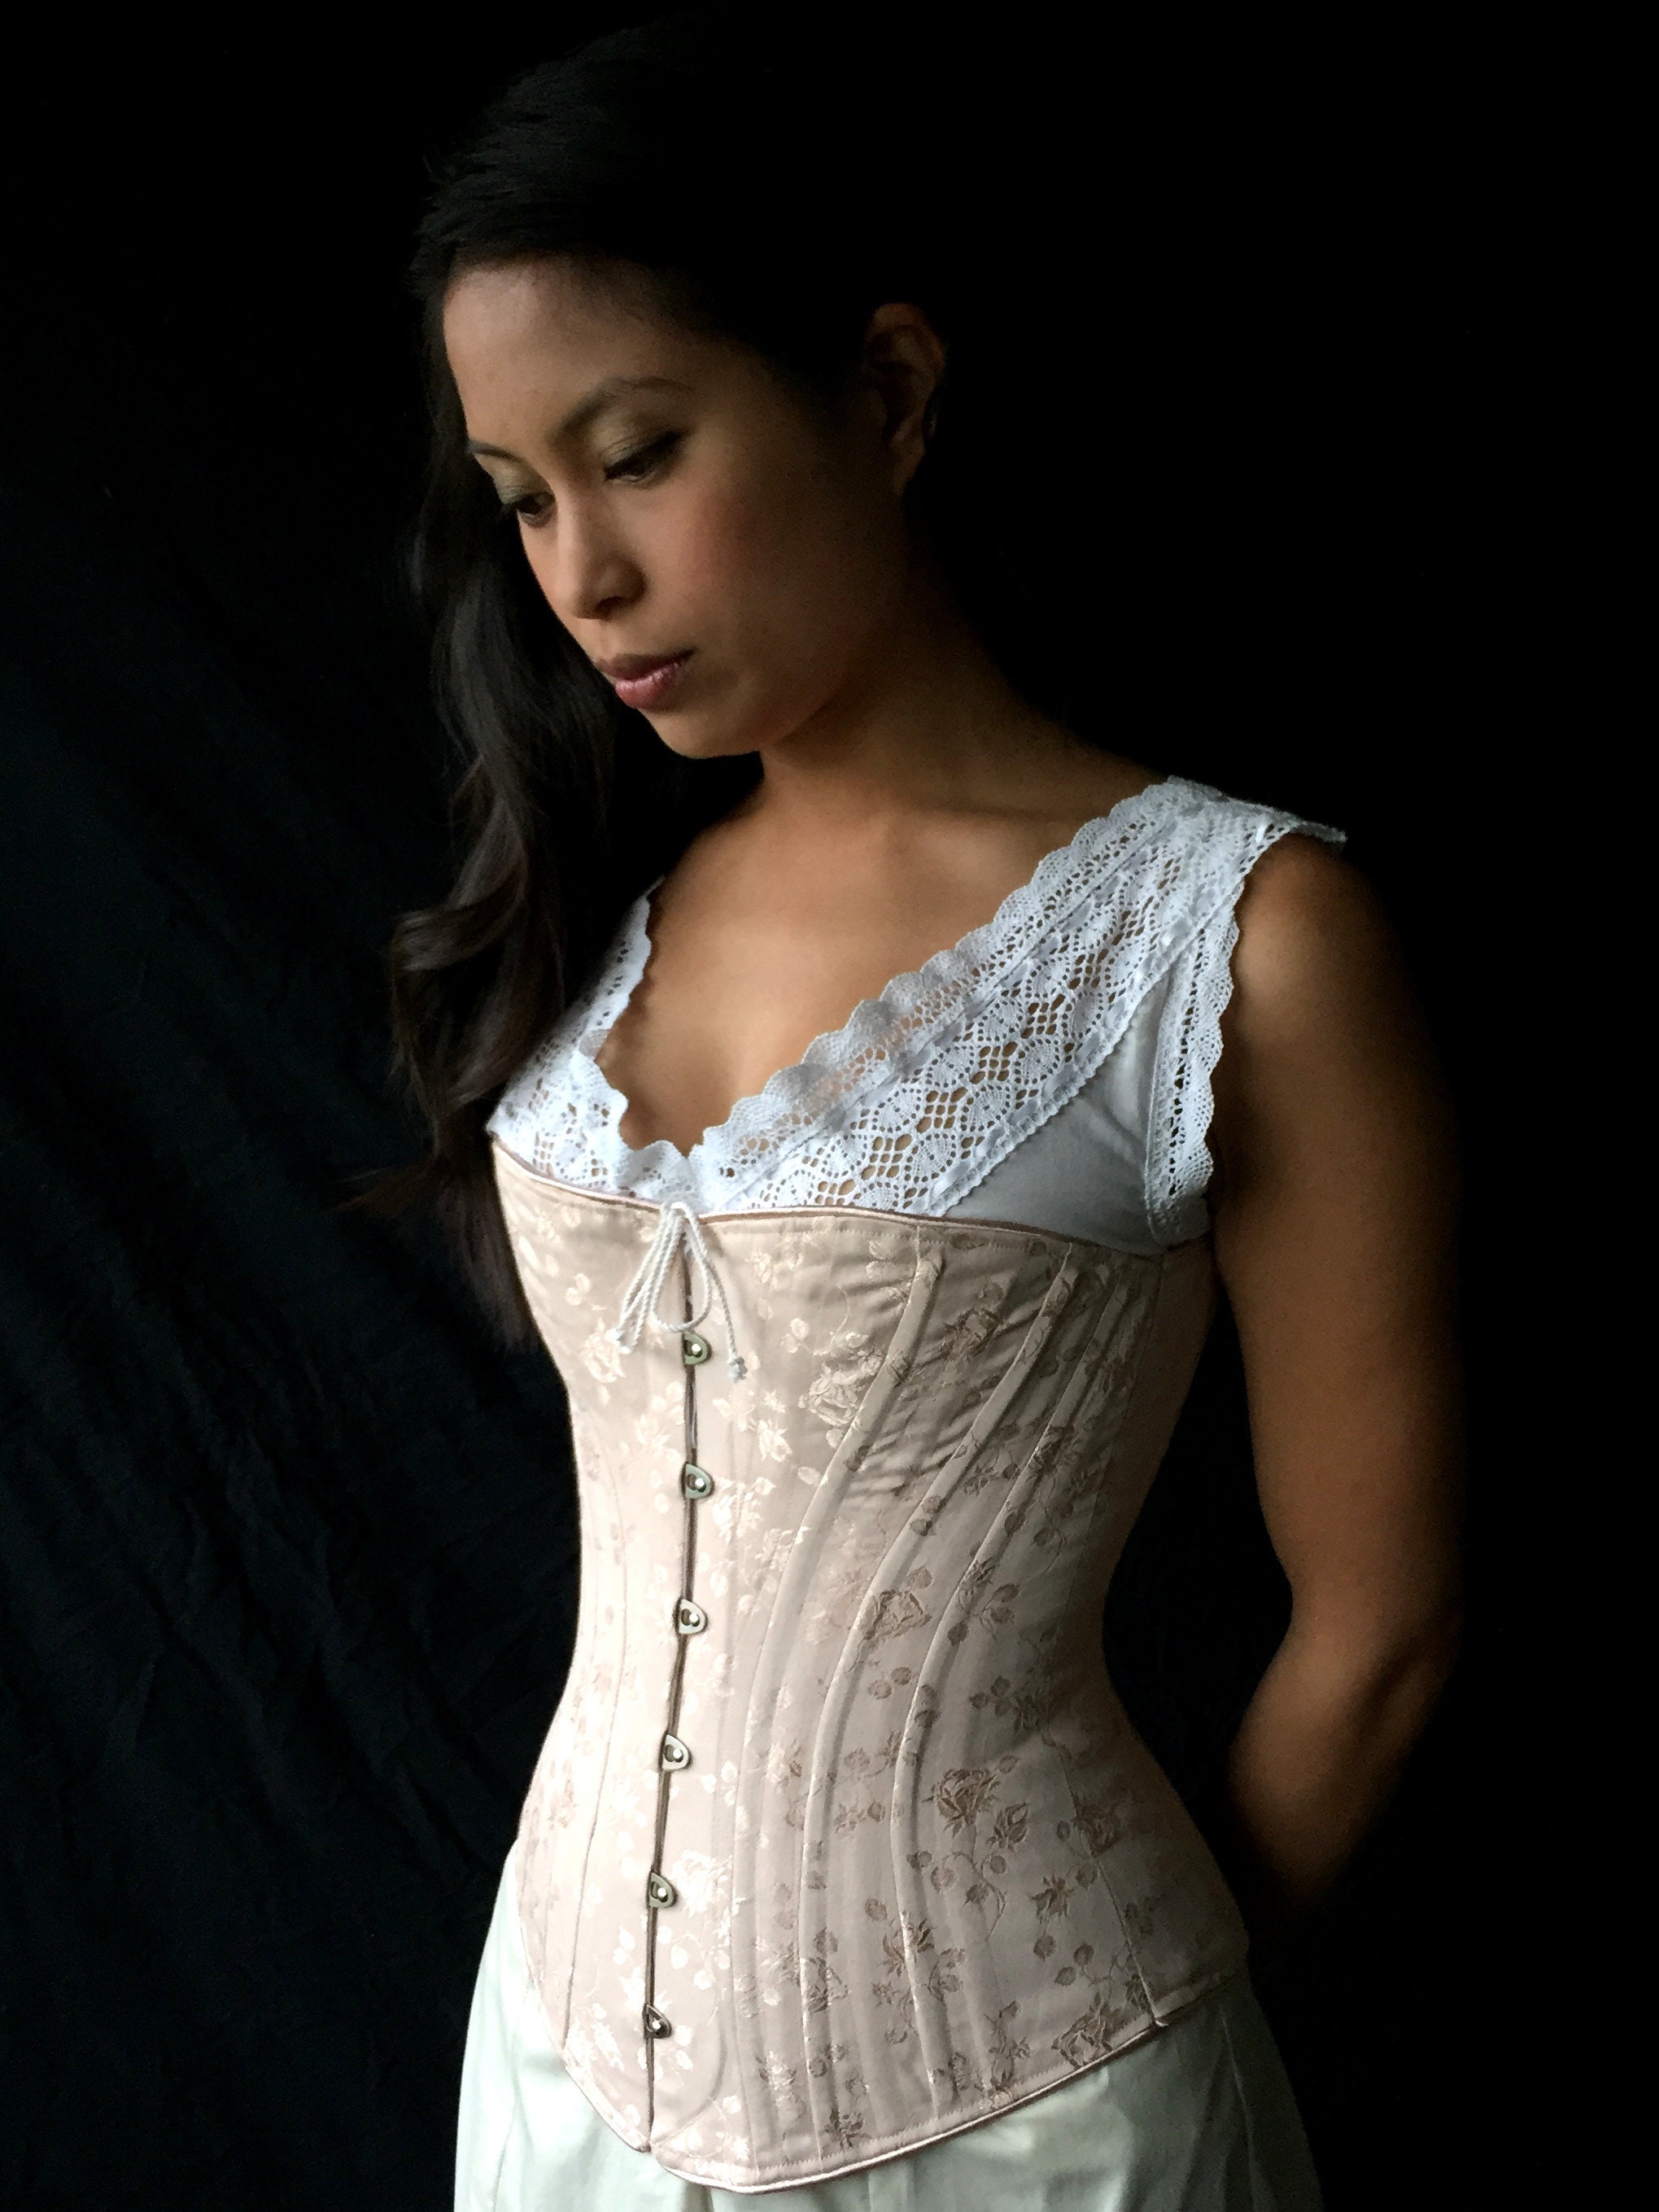 Victorian Corset C. 1880 Alice in Pastel Rose Brocade Coutil, Spoon Busk  Front Opening Back Lacing Hourglass Curvy Bridal Elegant Historical -   Canada